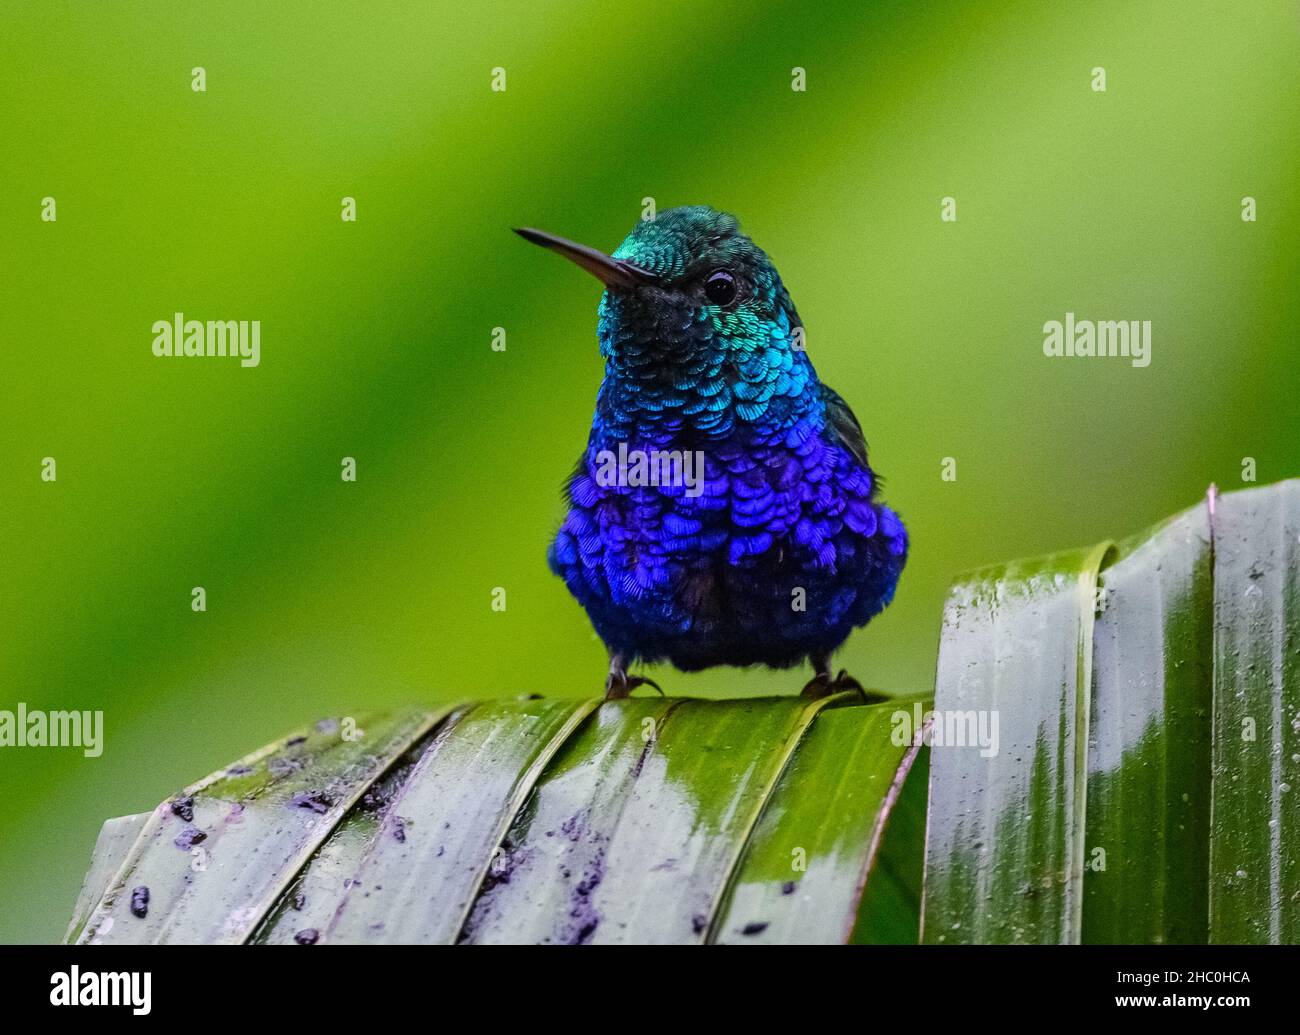 A Violet-bellied Hummingbird (Chlorestes julie) perched on a leaf. Ecuador, South America. Stock Photo